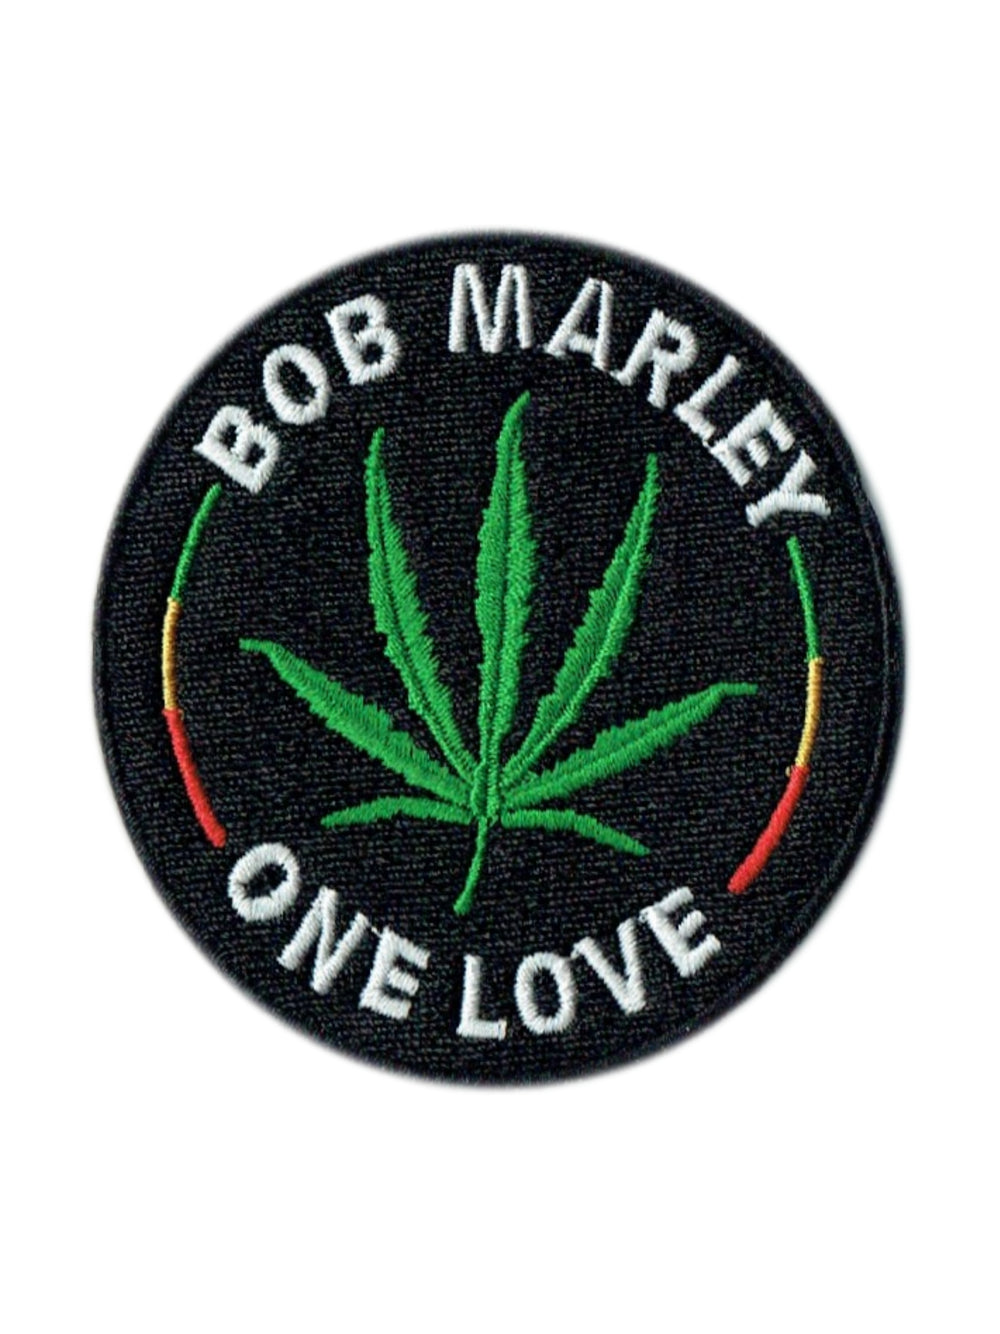 Bob Marley One Love Leaf Official Woven Patch Brand New